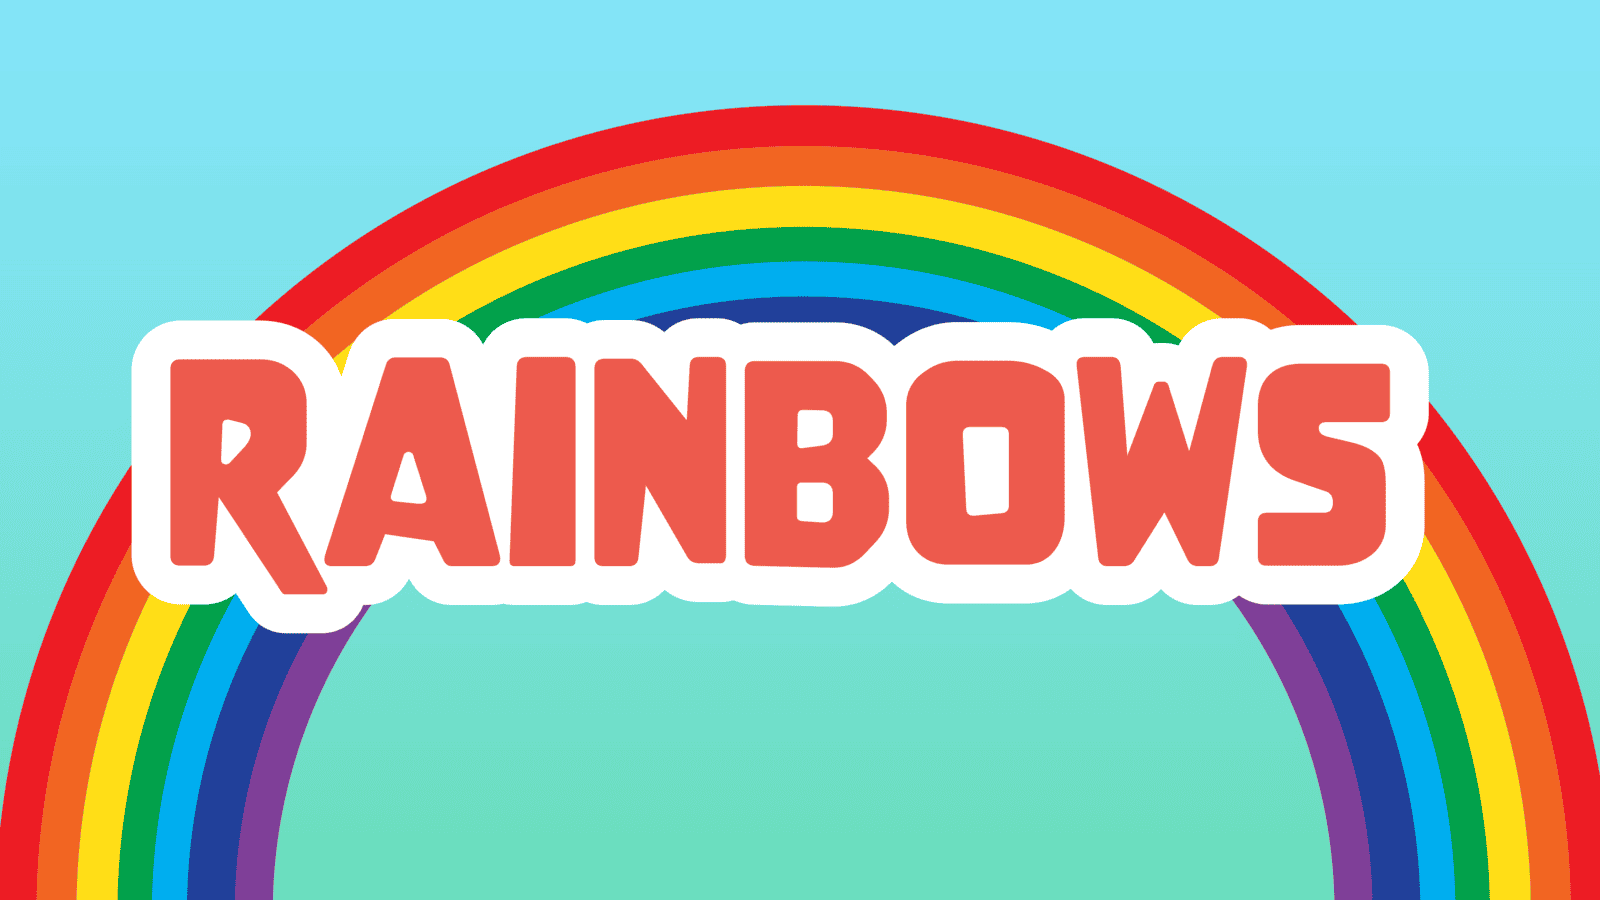 Rainbows Facts for Kids – 5 Outstanding Facts about Rainbows